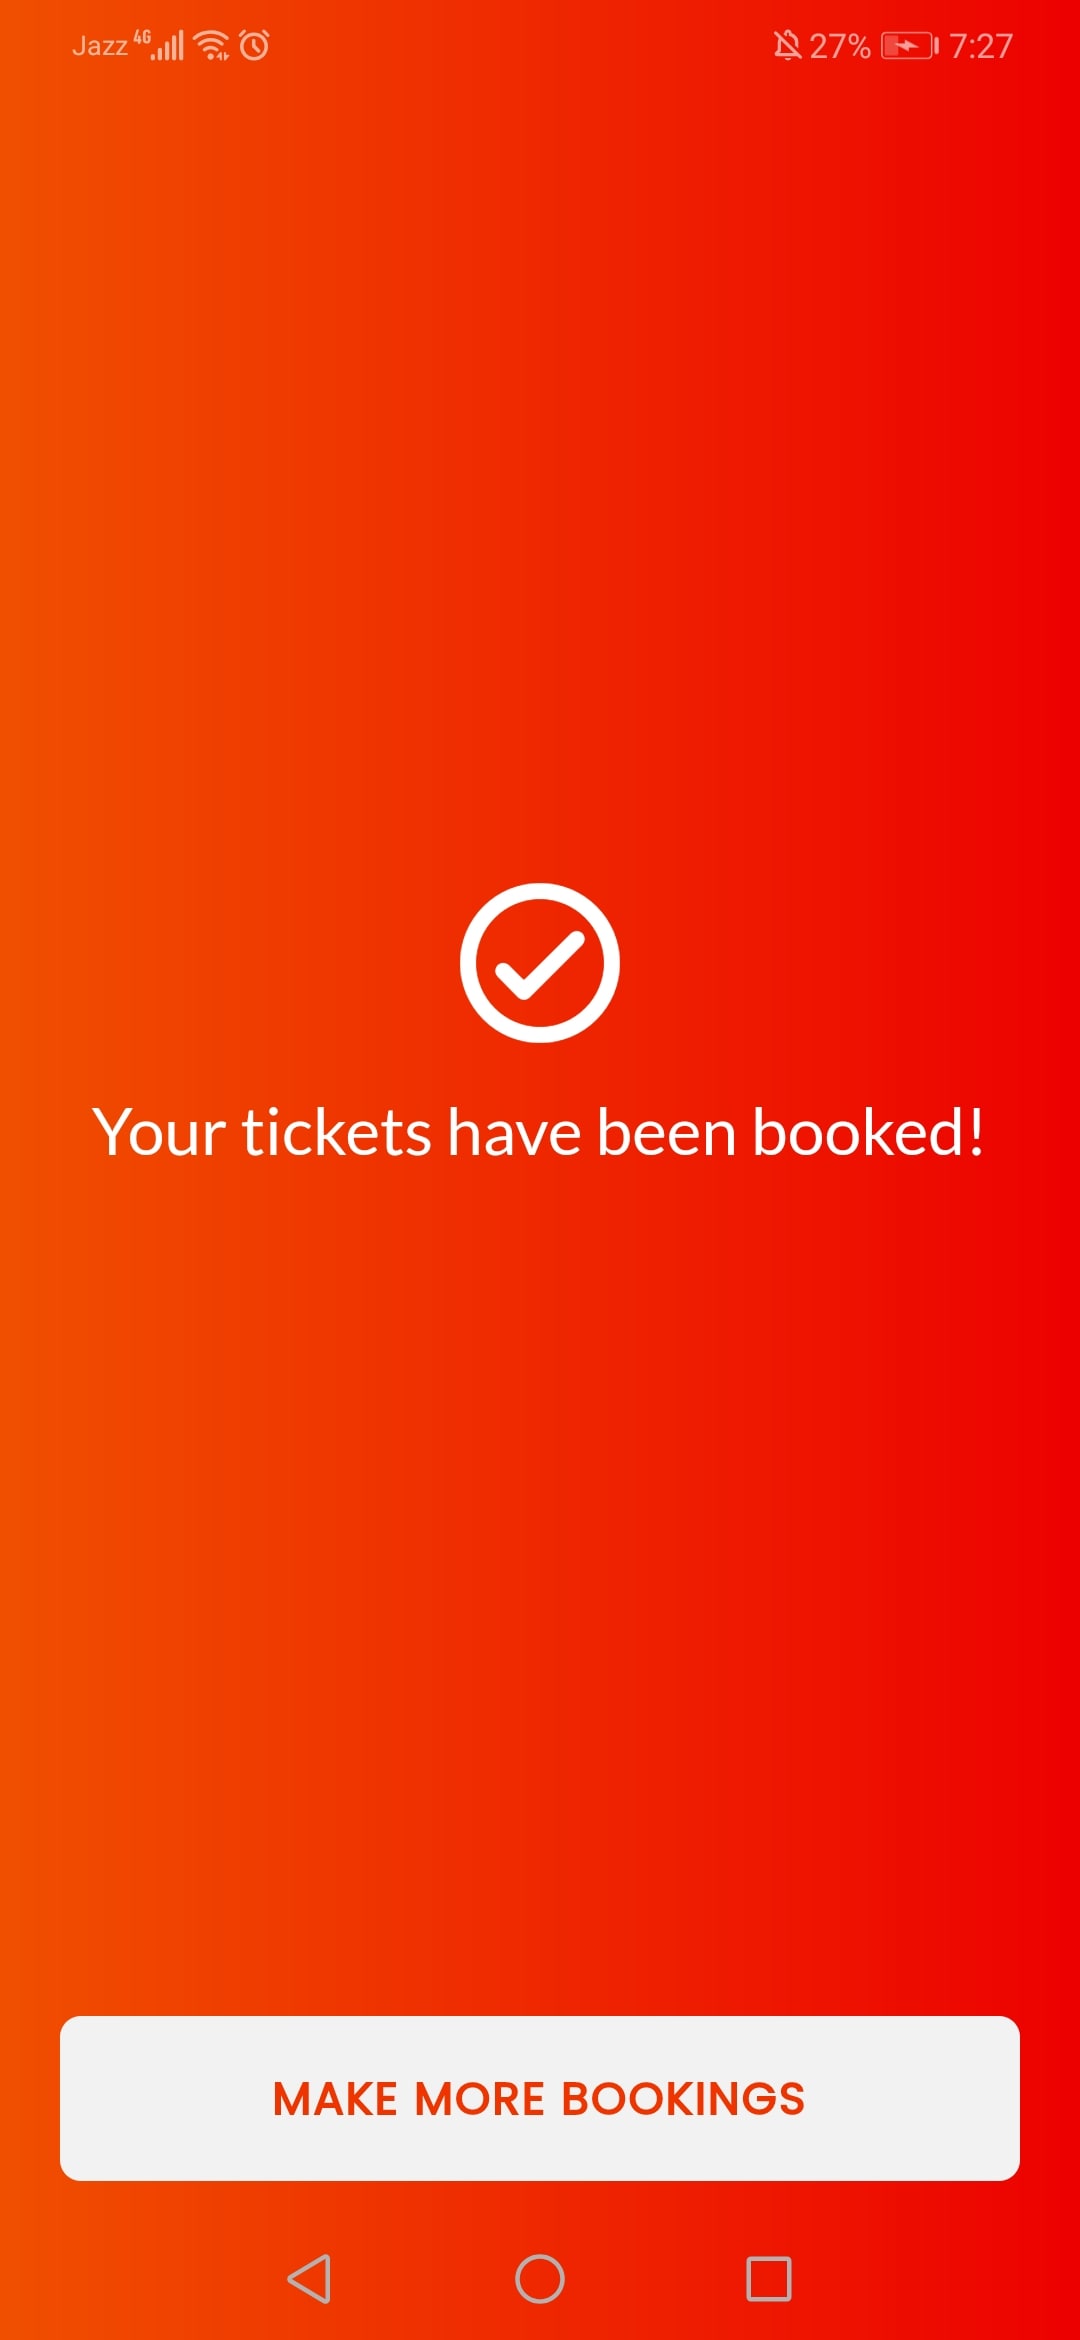 A cinema ticket booking app made with Flutter SDK